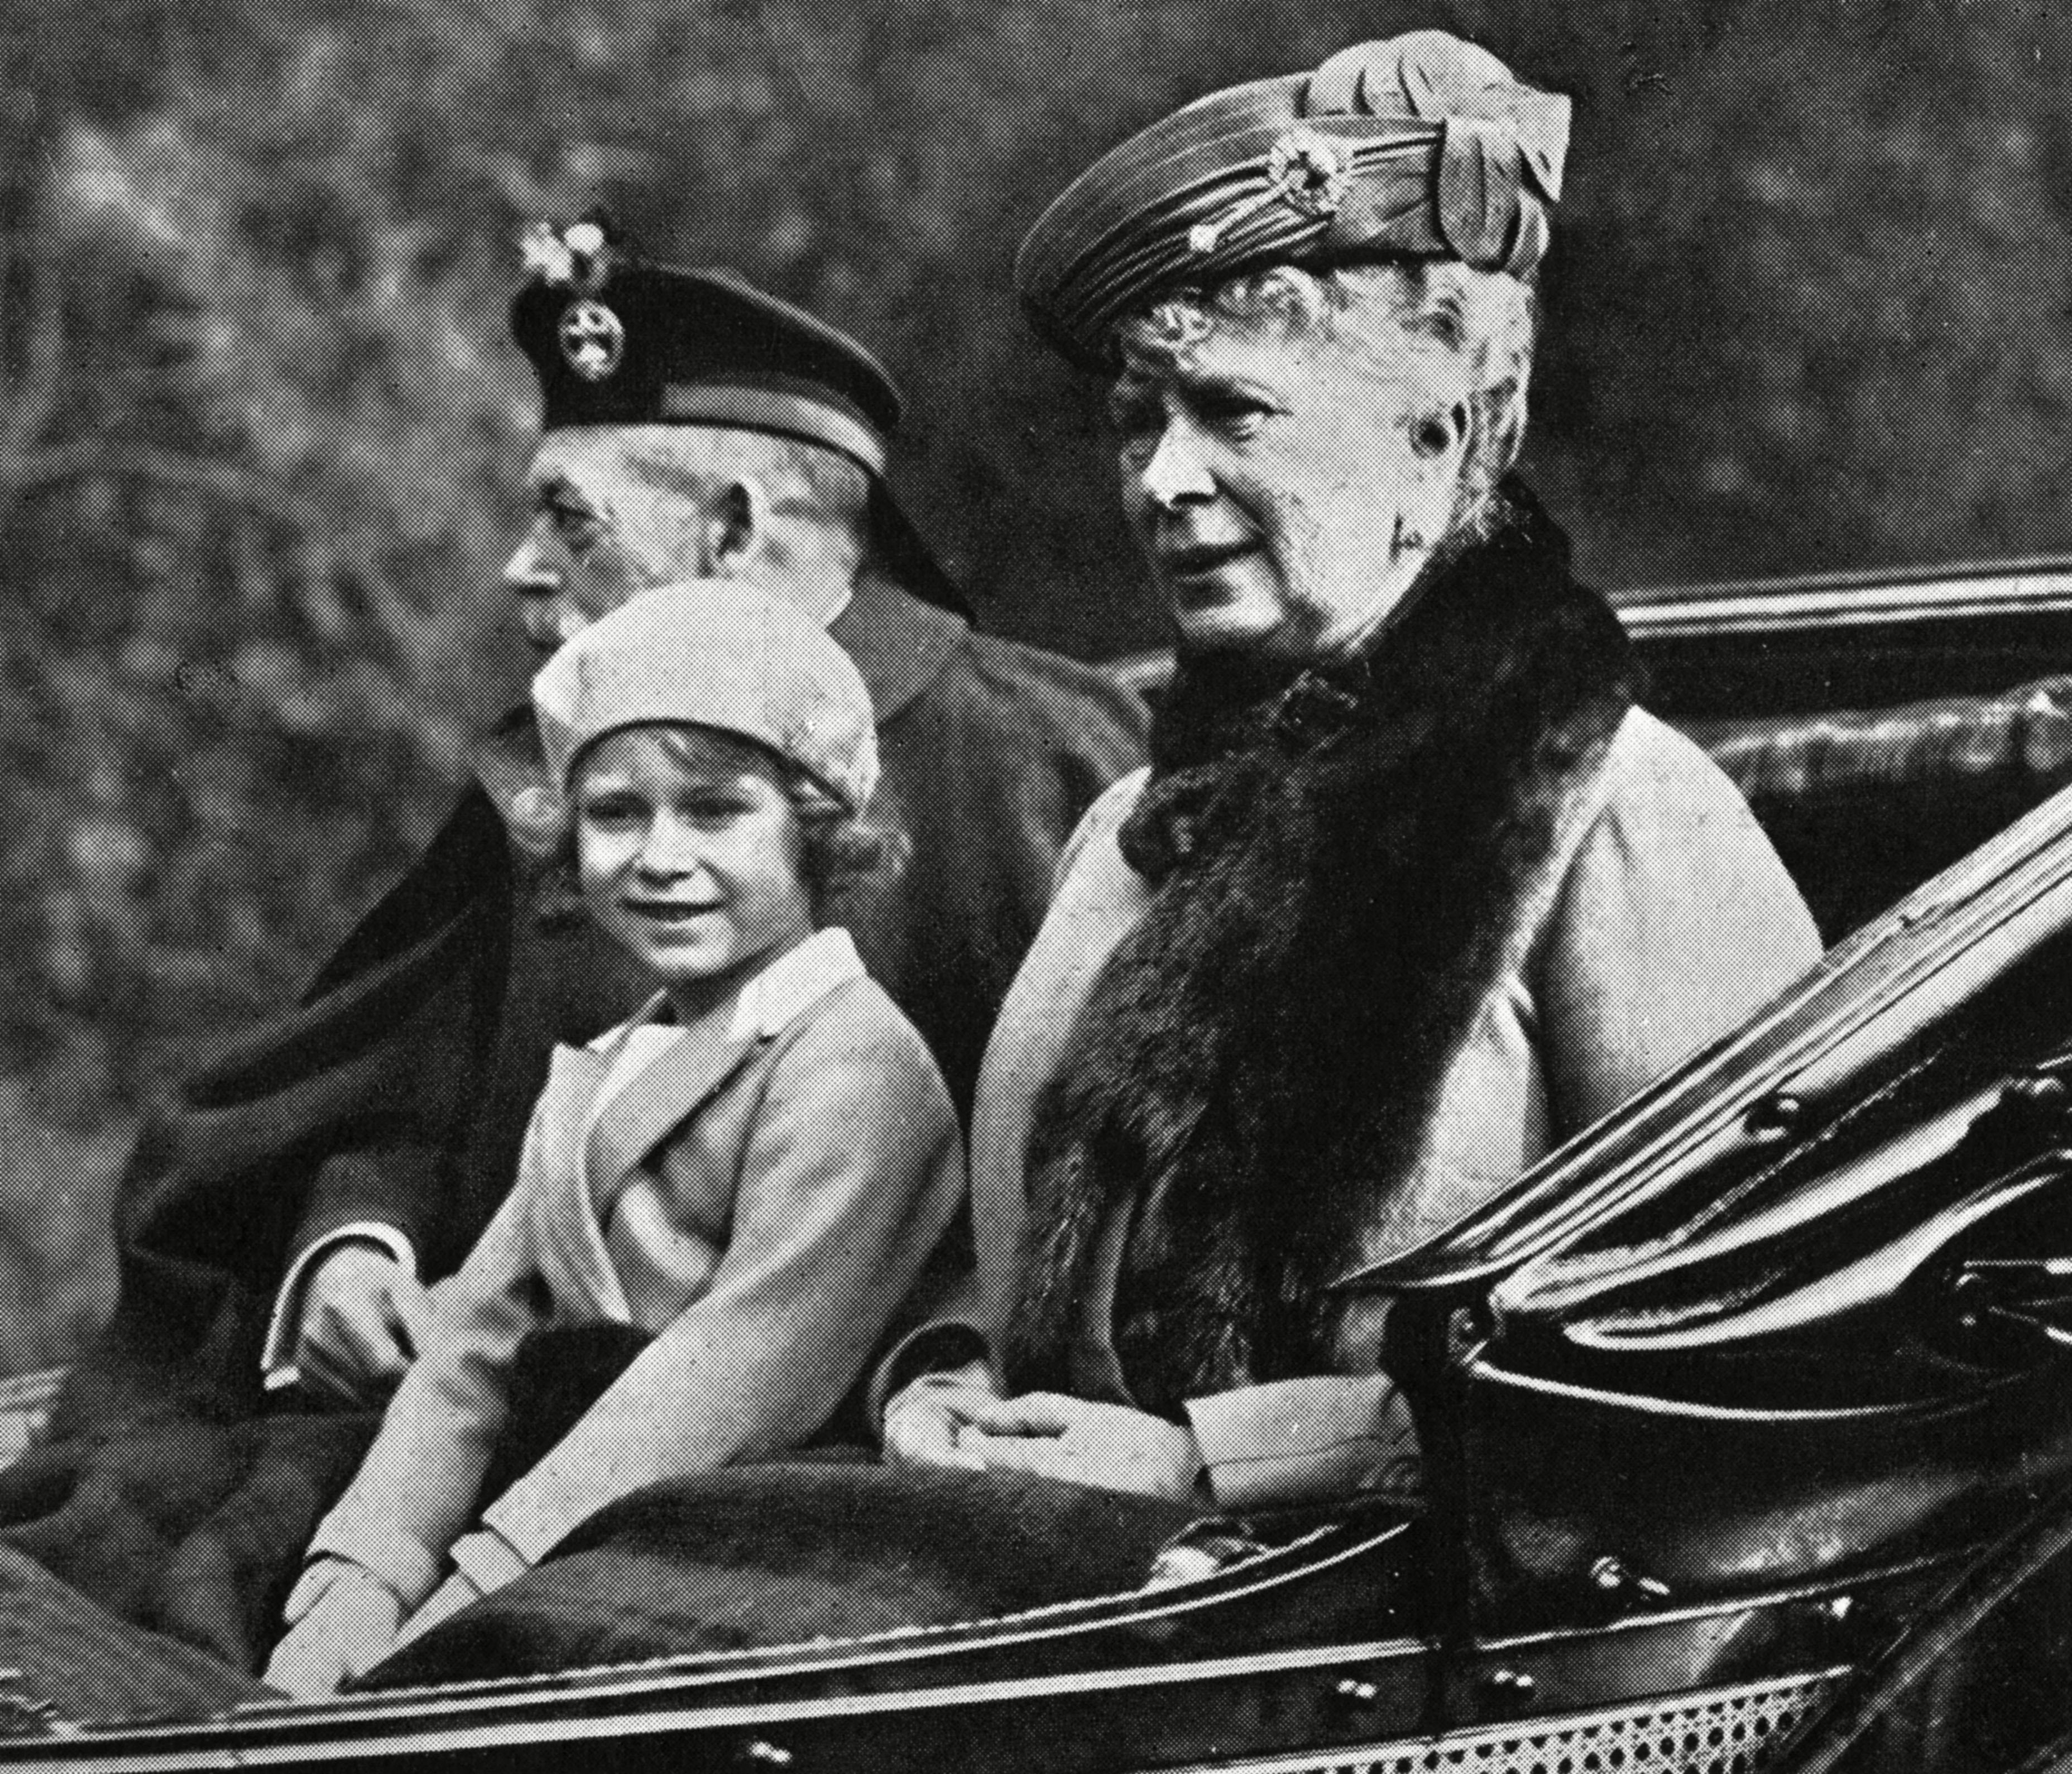 <p>Accompanied by grandmother Queen Mary and grandfather King George V, young Princess Elizabeth -- later Queen Elizabeth II -- traveled by carriage to a service at Crathie Church during a stay at Balmoral in Scotland in 1932.</p>